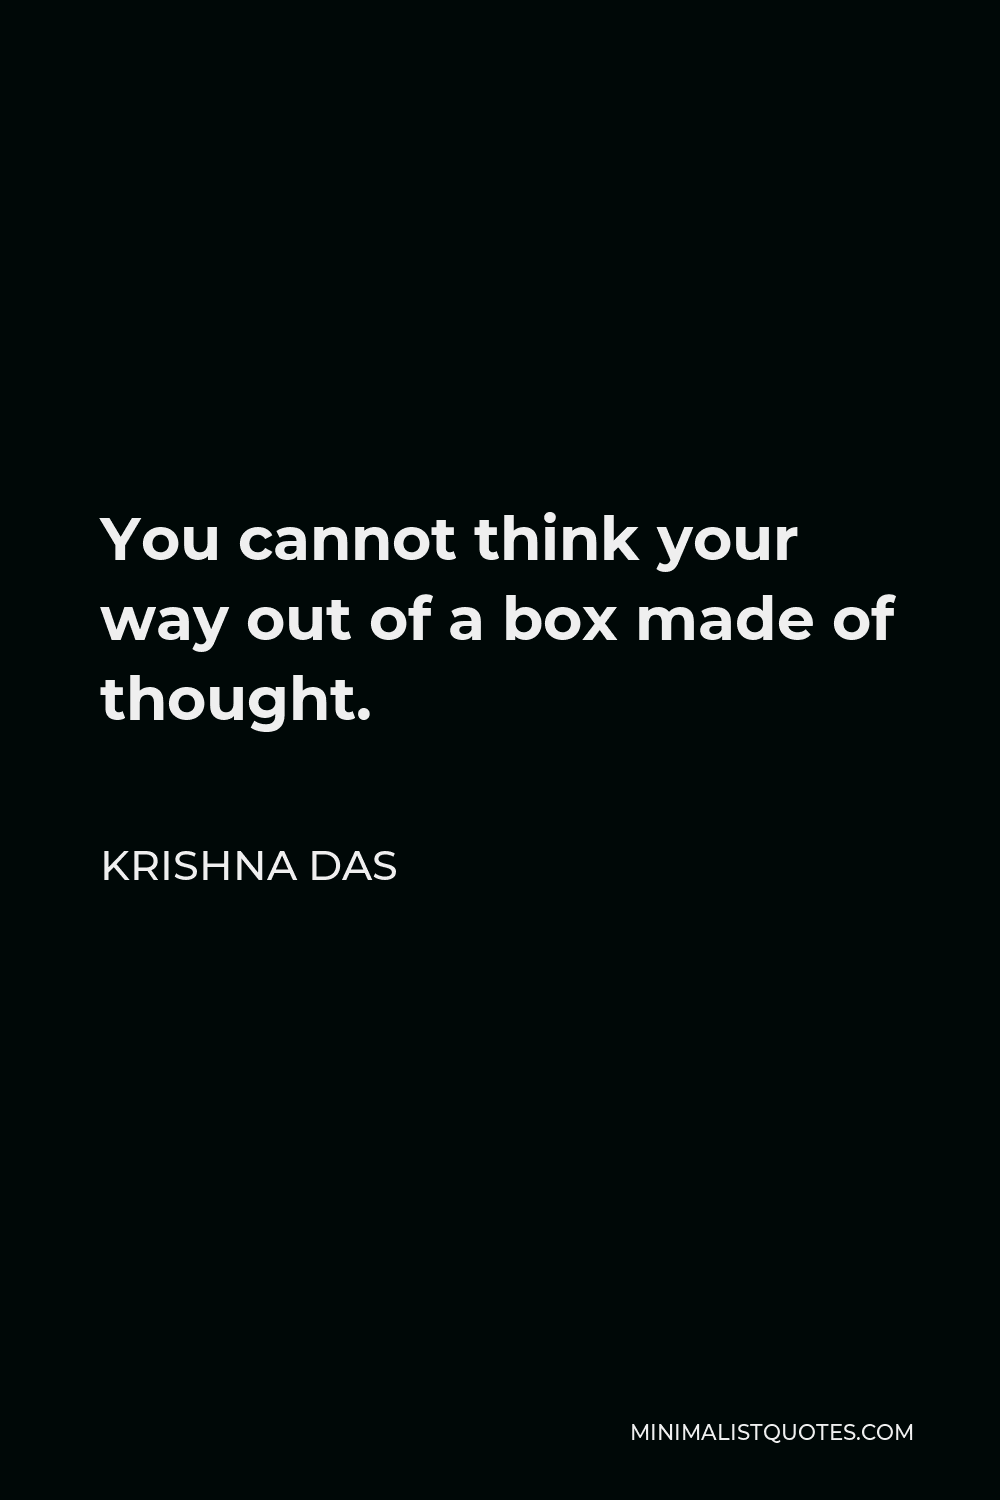 Krishna Das Quote - You cannot think your way out of a box made of thought.